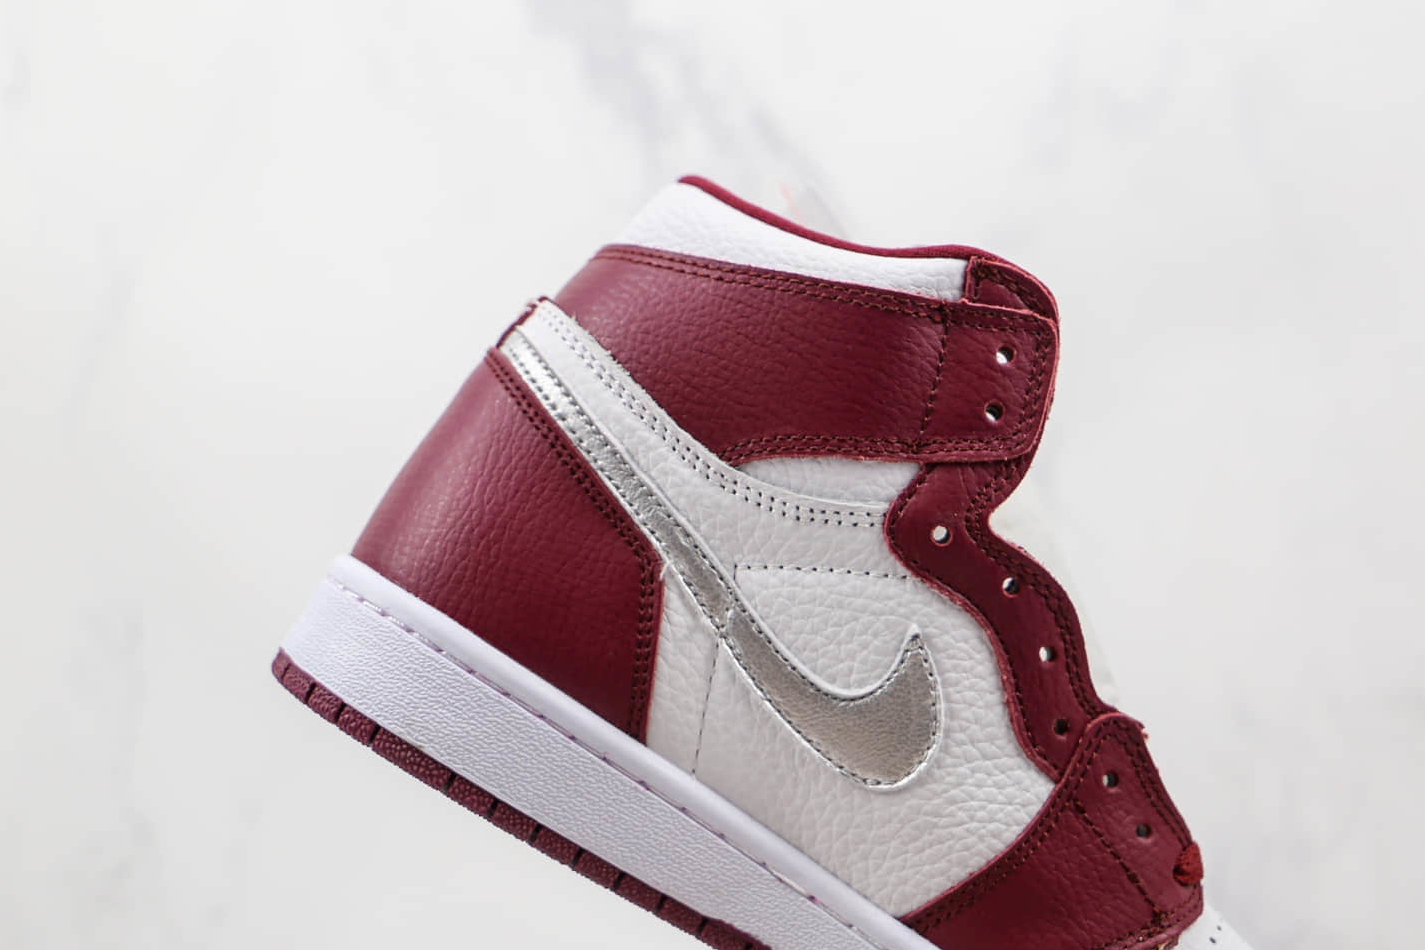 Air Jordan 1 Retro High OG 'Bordeaux' 555088-611 - Iconic Sneakers for Style and Comfort